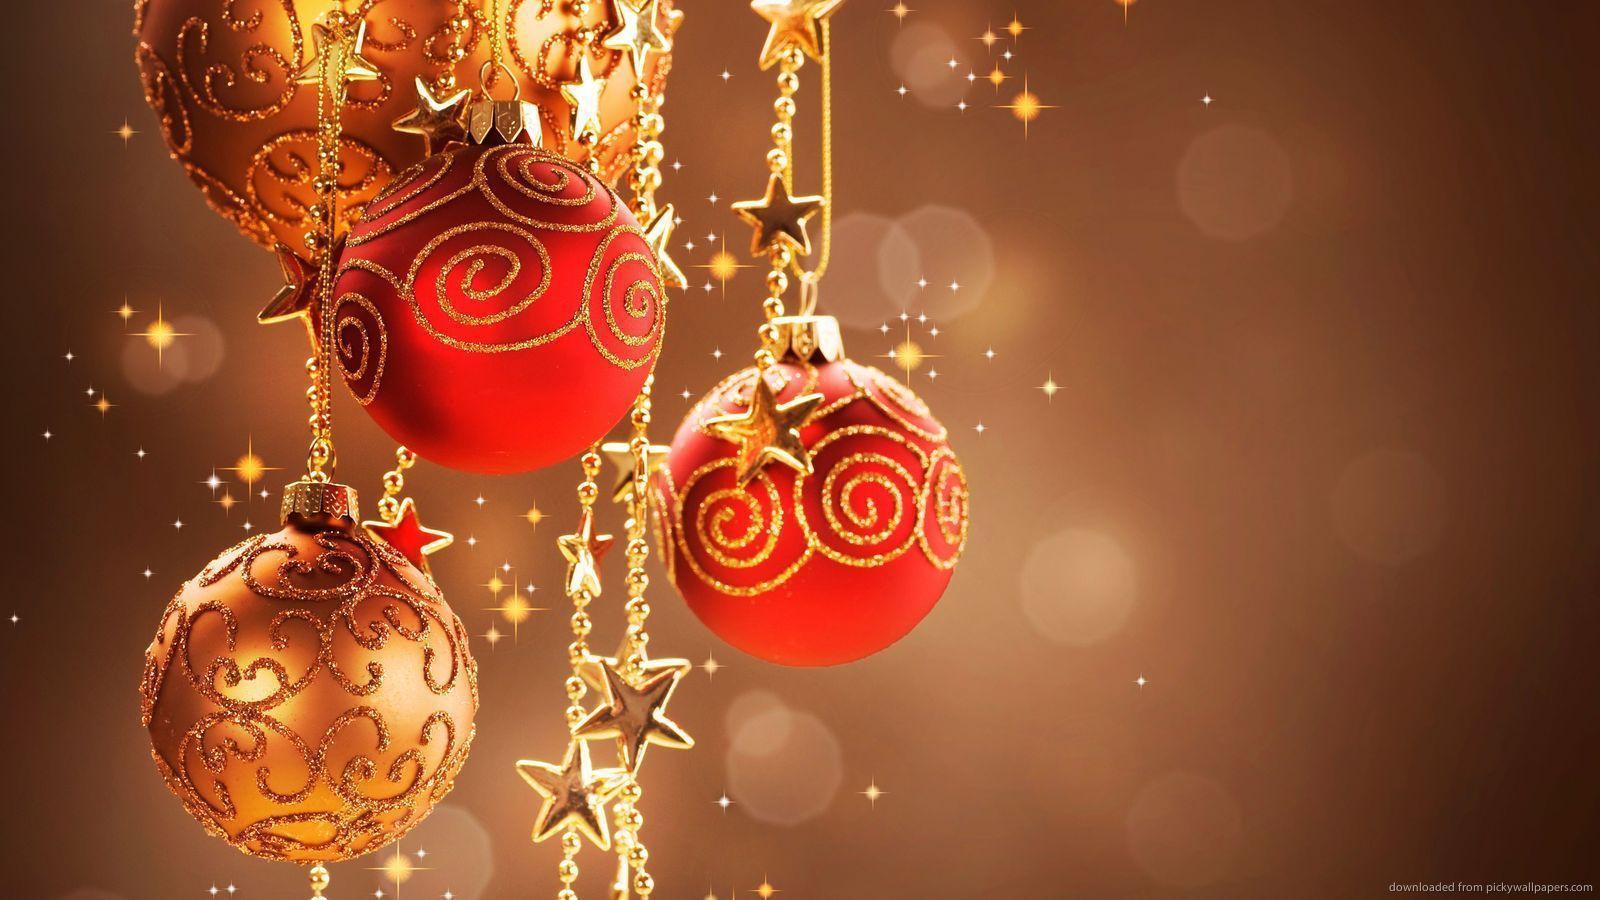 Download 1600x900 Christmas Decorations Ultra HD Wallpapers